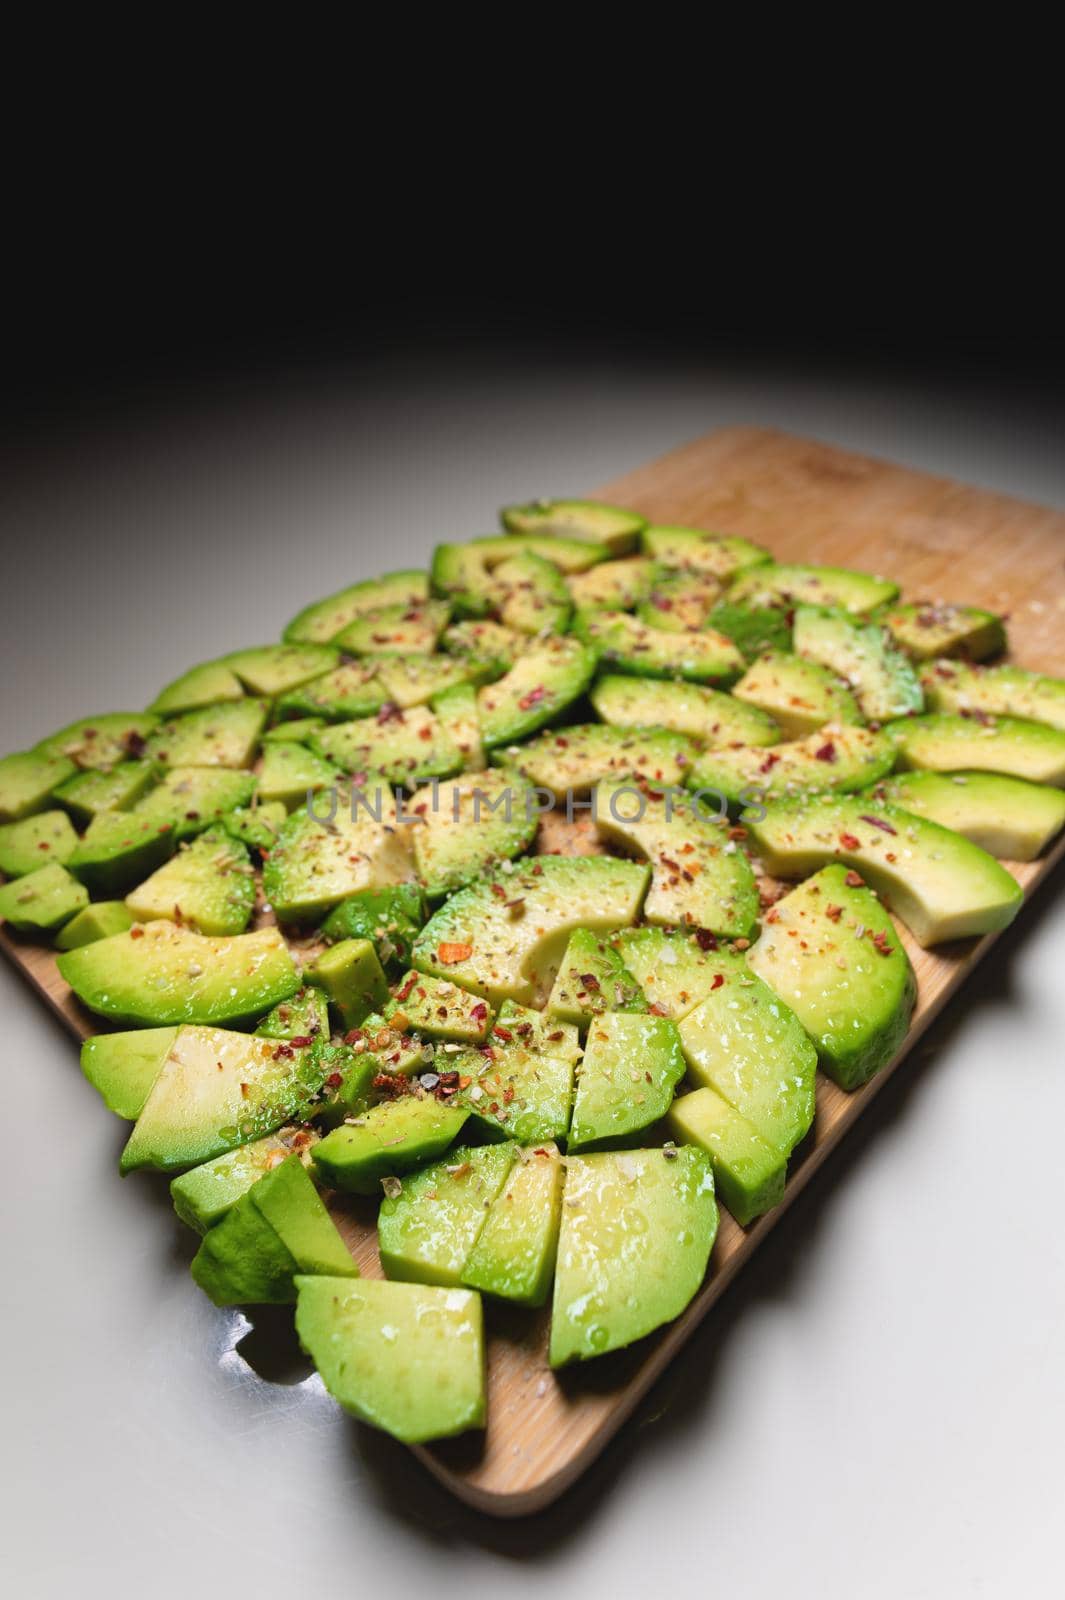 Wide Angle Large slices of sliced ripe avocado lie textured on a wooden cutting board. Sprinkled with spices. Healthy food. Vegetarianism.